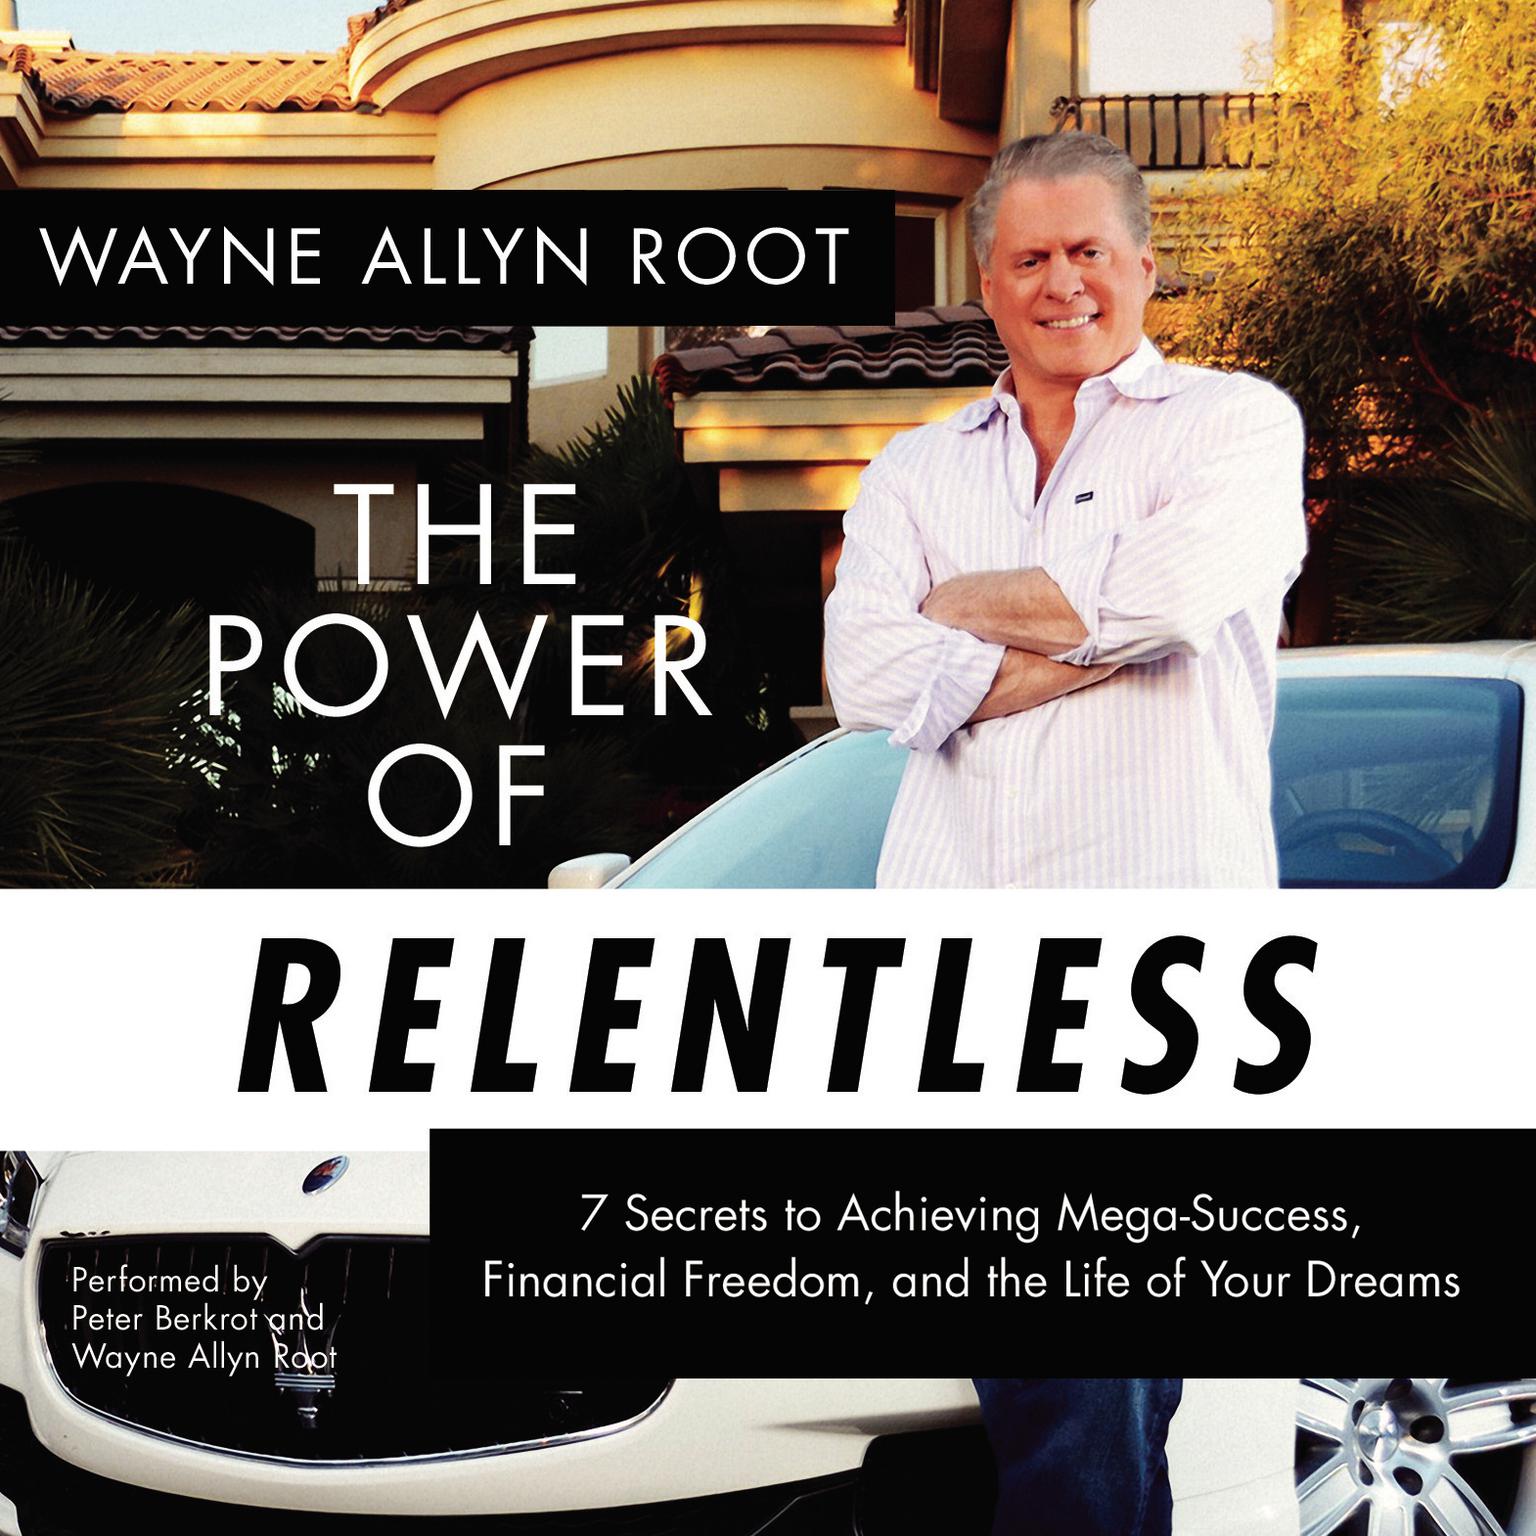 The Power of Relentless: 7 Secrets to Achieving Mega-Success, Financial Freedom, and the Life of Your Dreams Audiobook, by Wayne Allyn Root